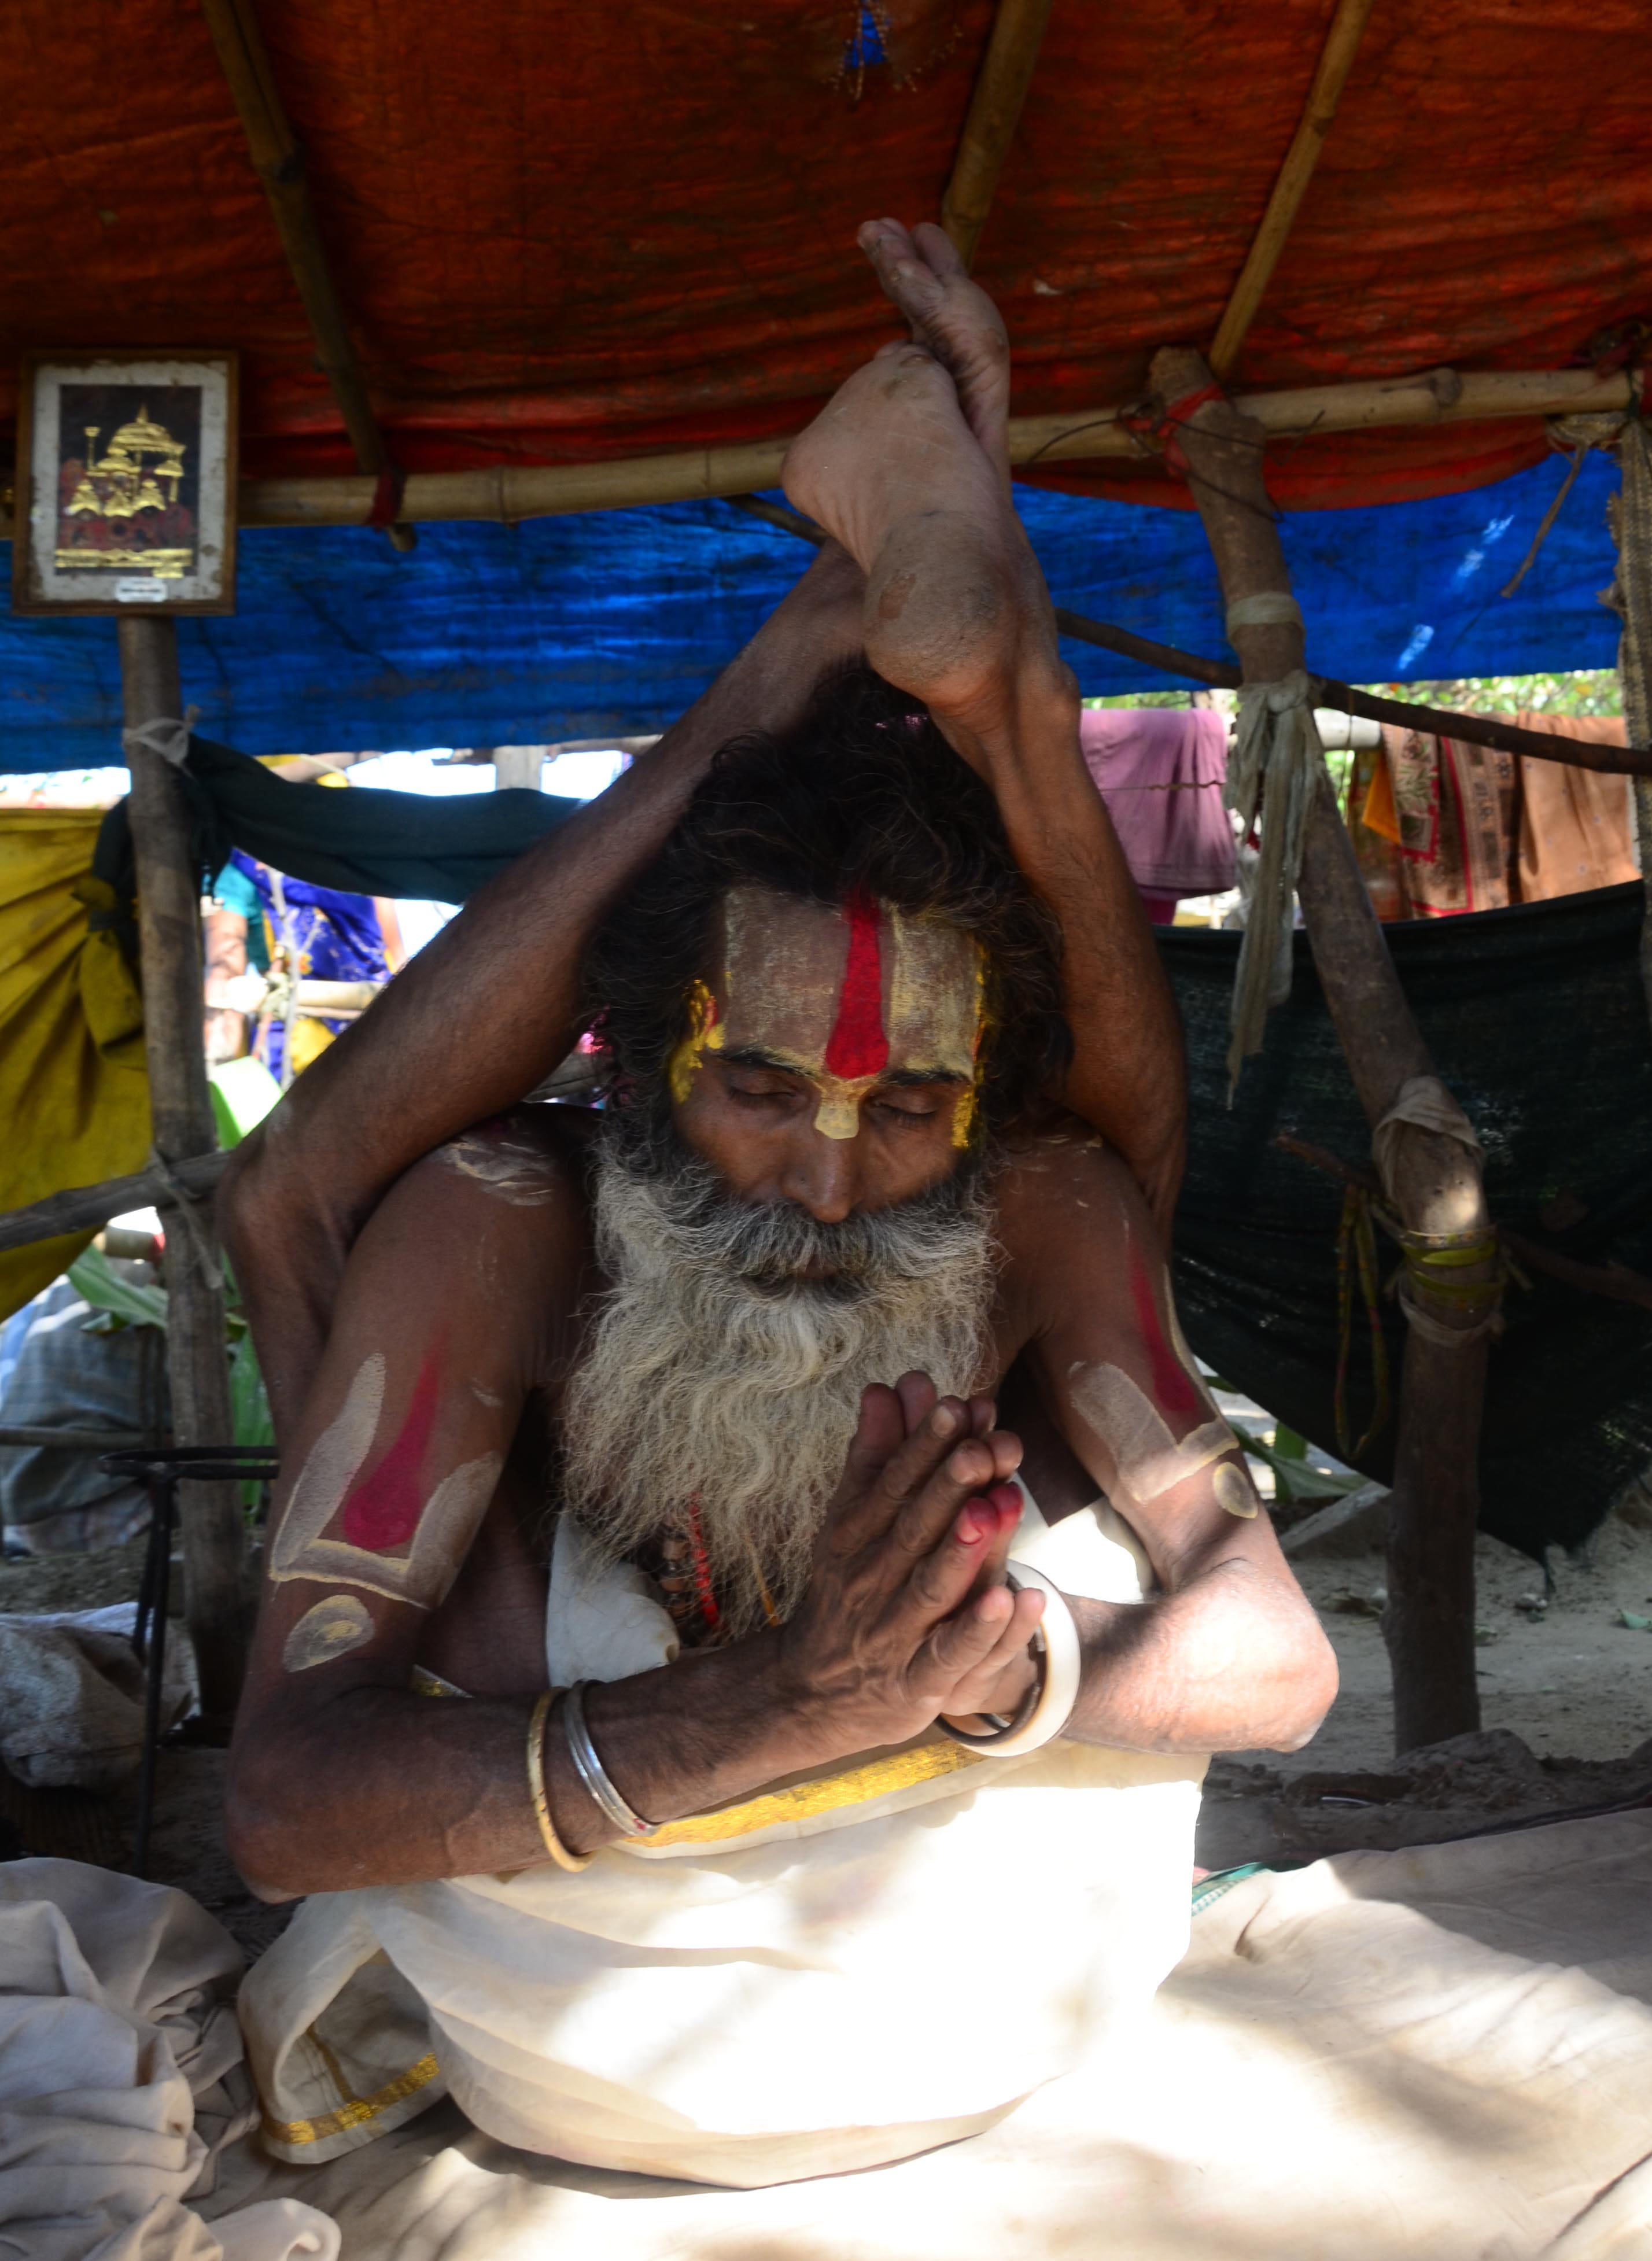 A sadhu performing Yoga to mark today's International Day of Yoga